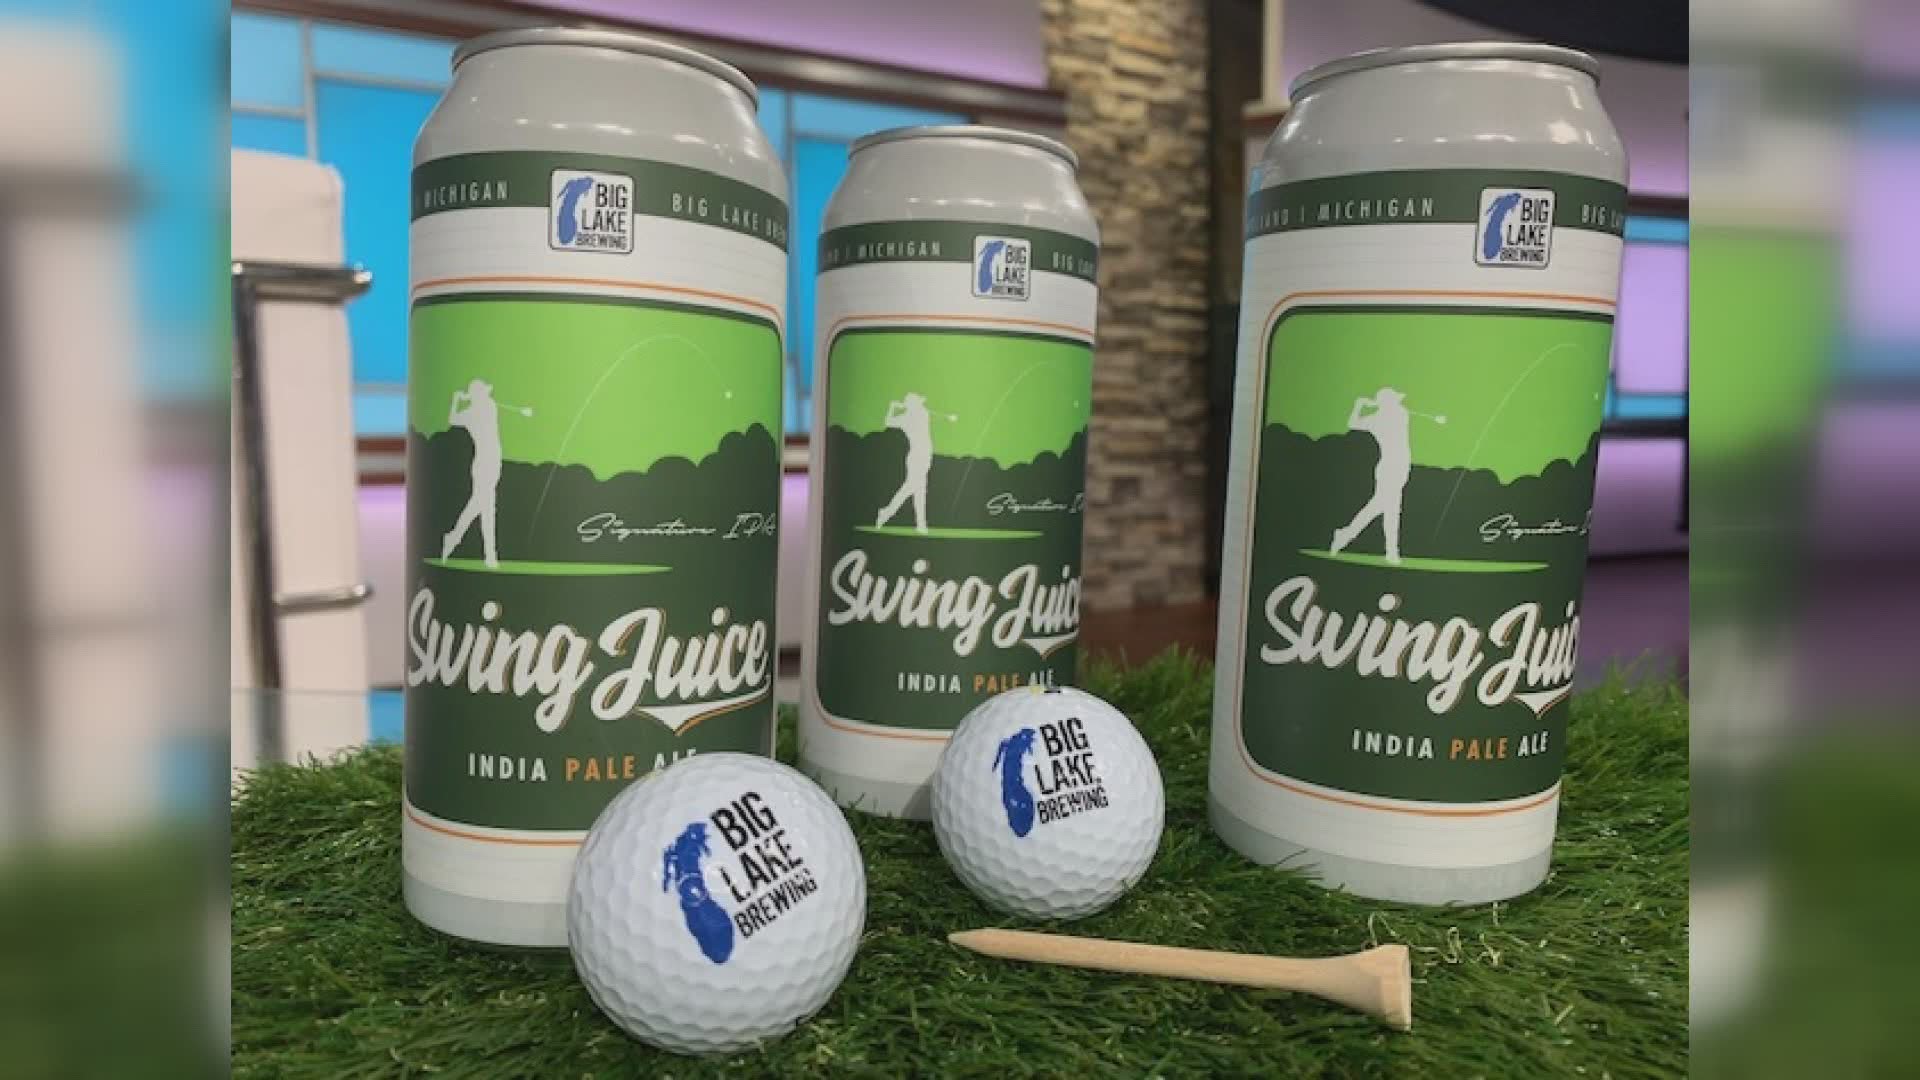 If you like golf and beer then you're going to want to try out the new Swing Juice that just hit the shelves at Big Lake Brewing.